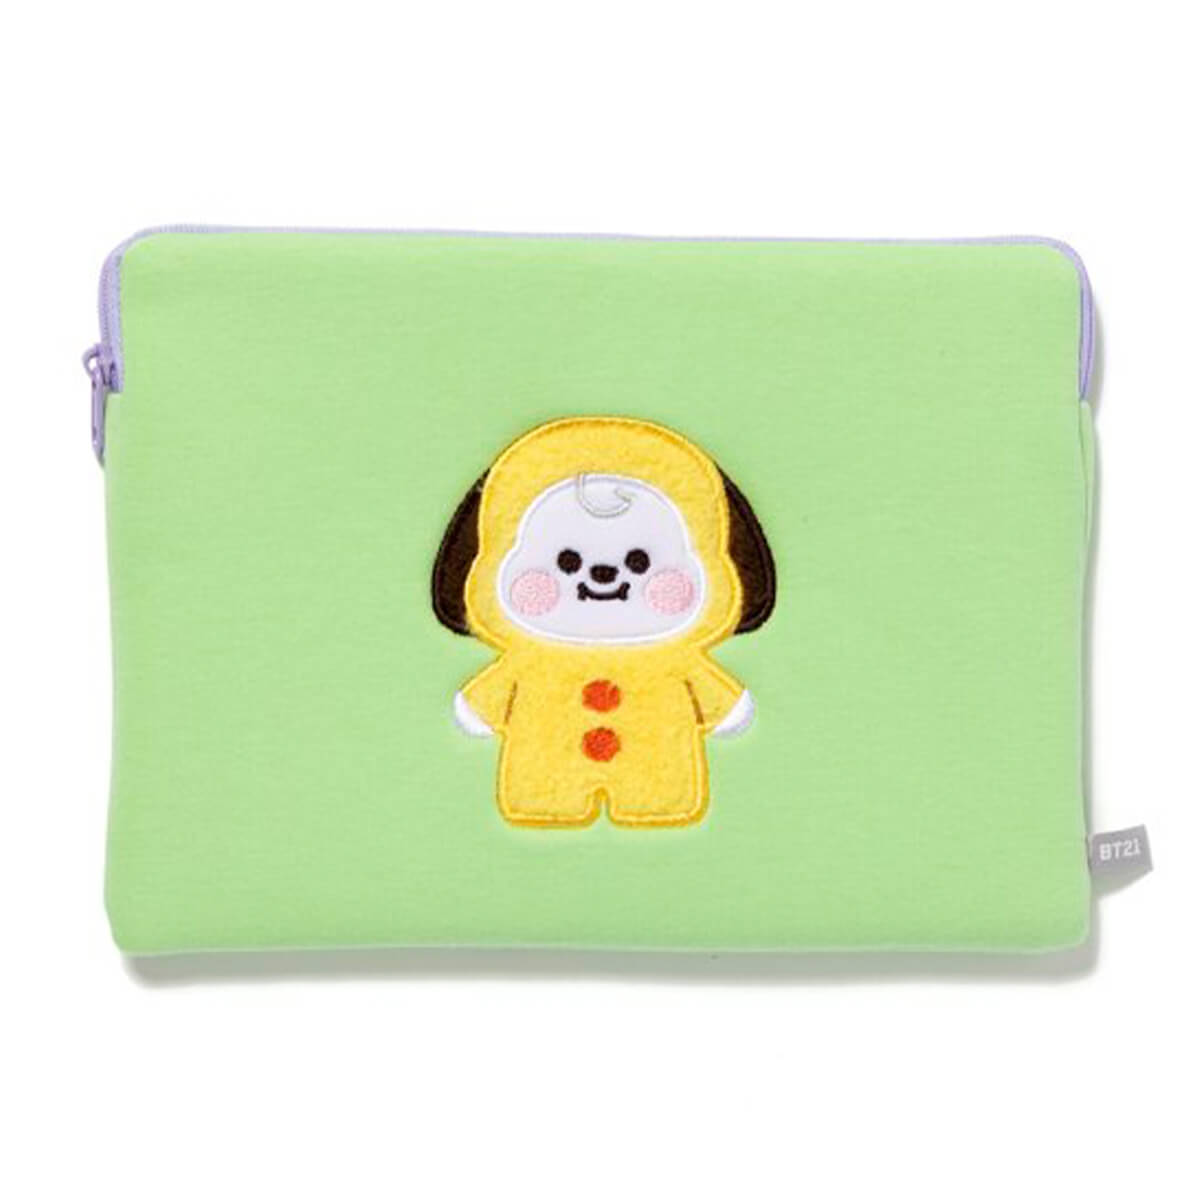 BT21 CHIMMY BABY Multi Pouch